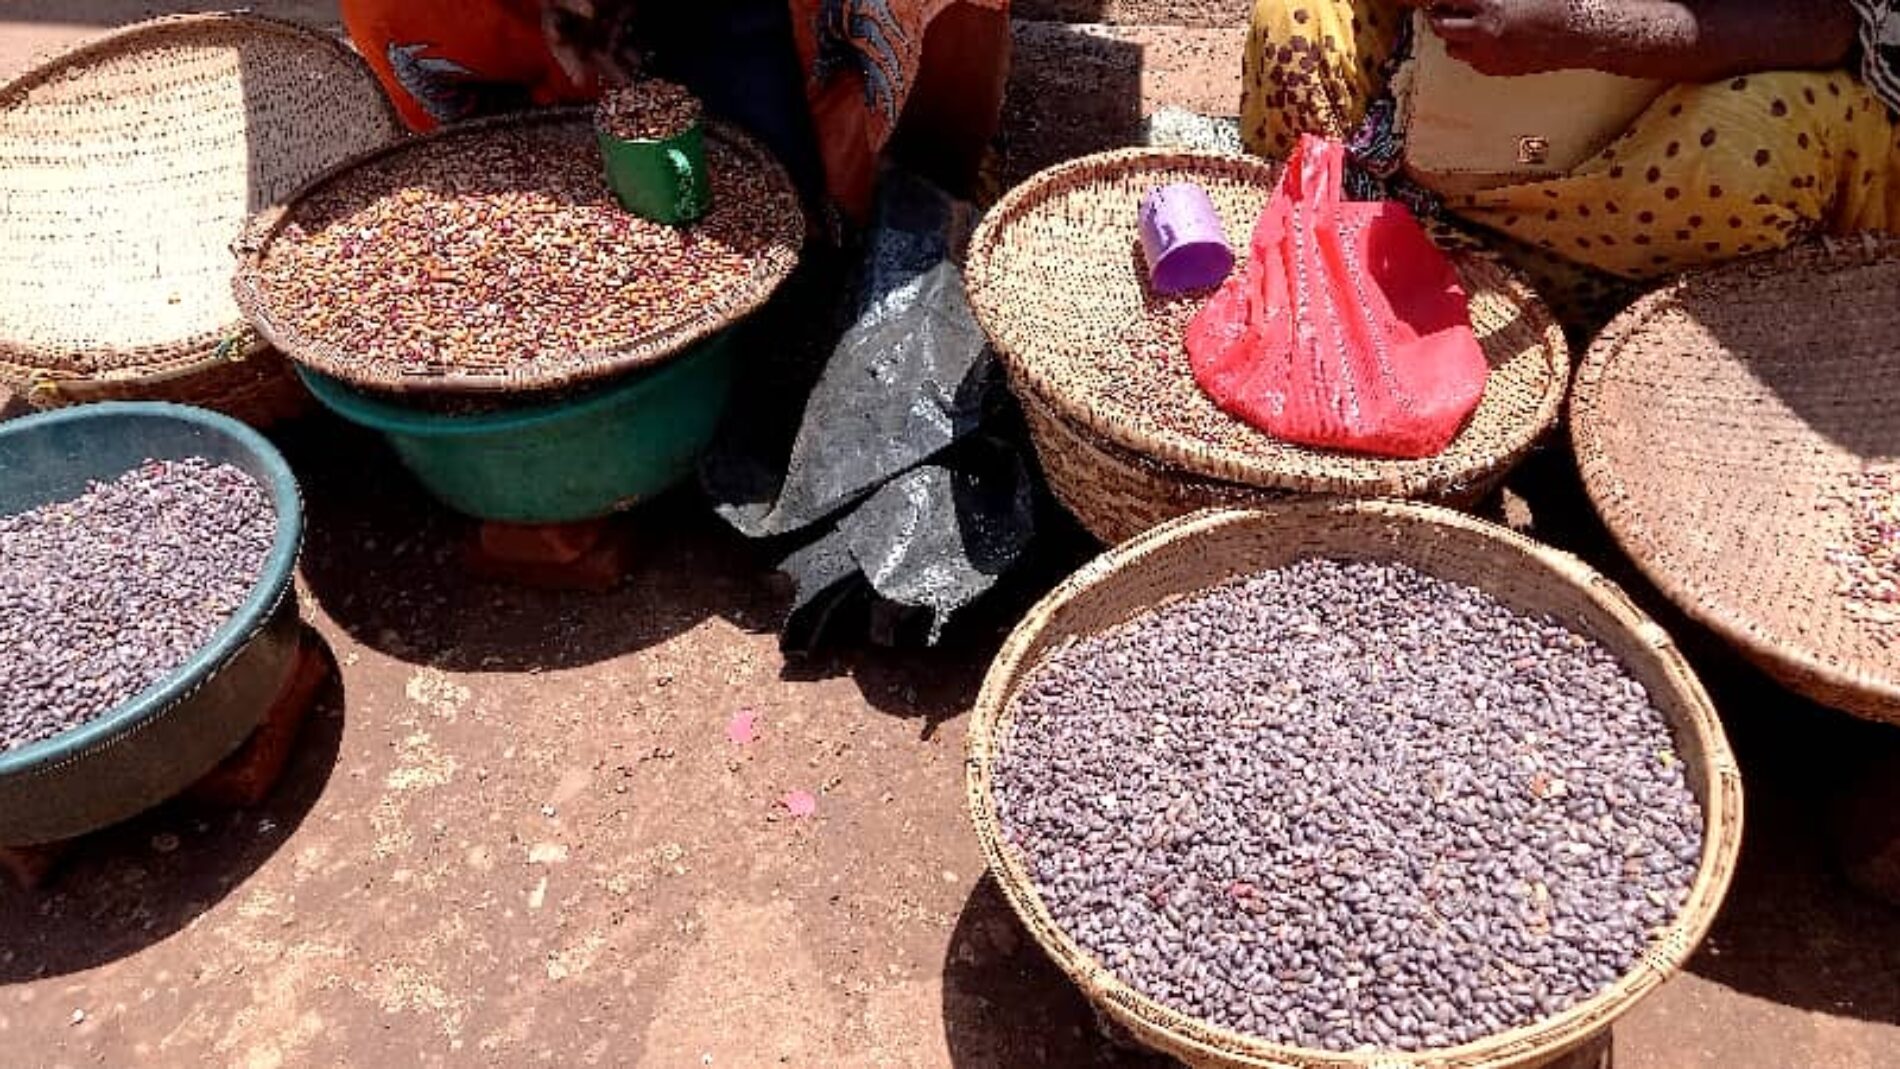 Muyinga: three people detained for illegal sale of beans in Tanzania